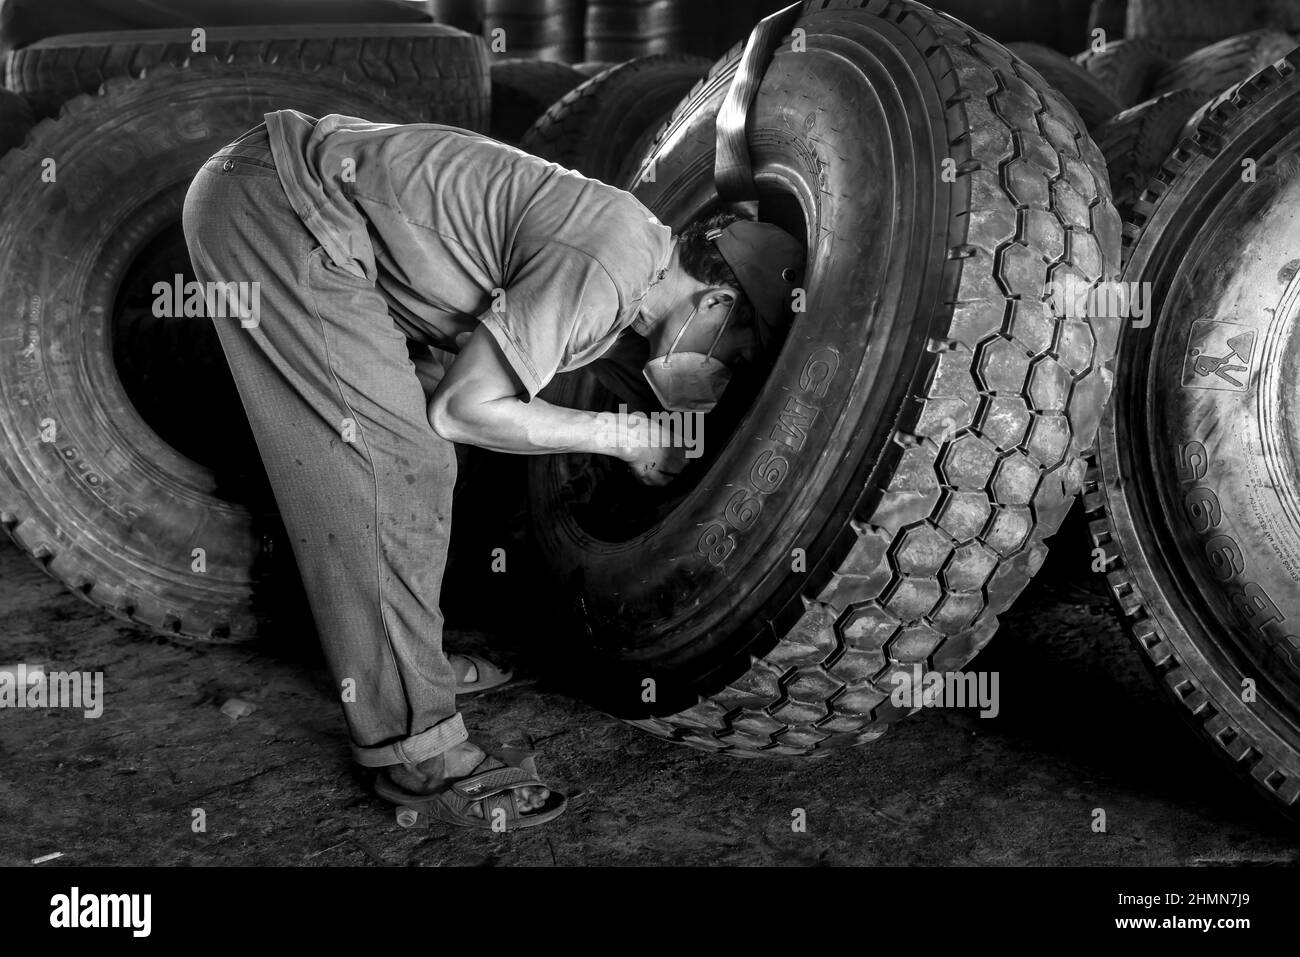 Son Tinh, Quang Ngai, Vietnam - December 31, 2021: workers work at an old car tire recycling factory in Son Tinh district, Quang Ngai province, Vietna Stock Photo